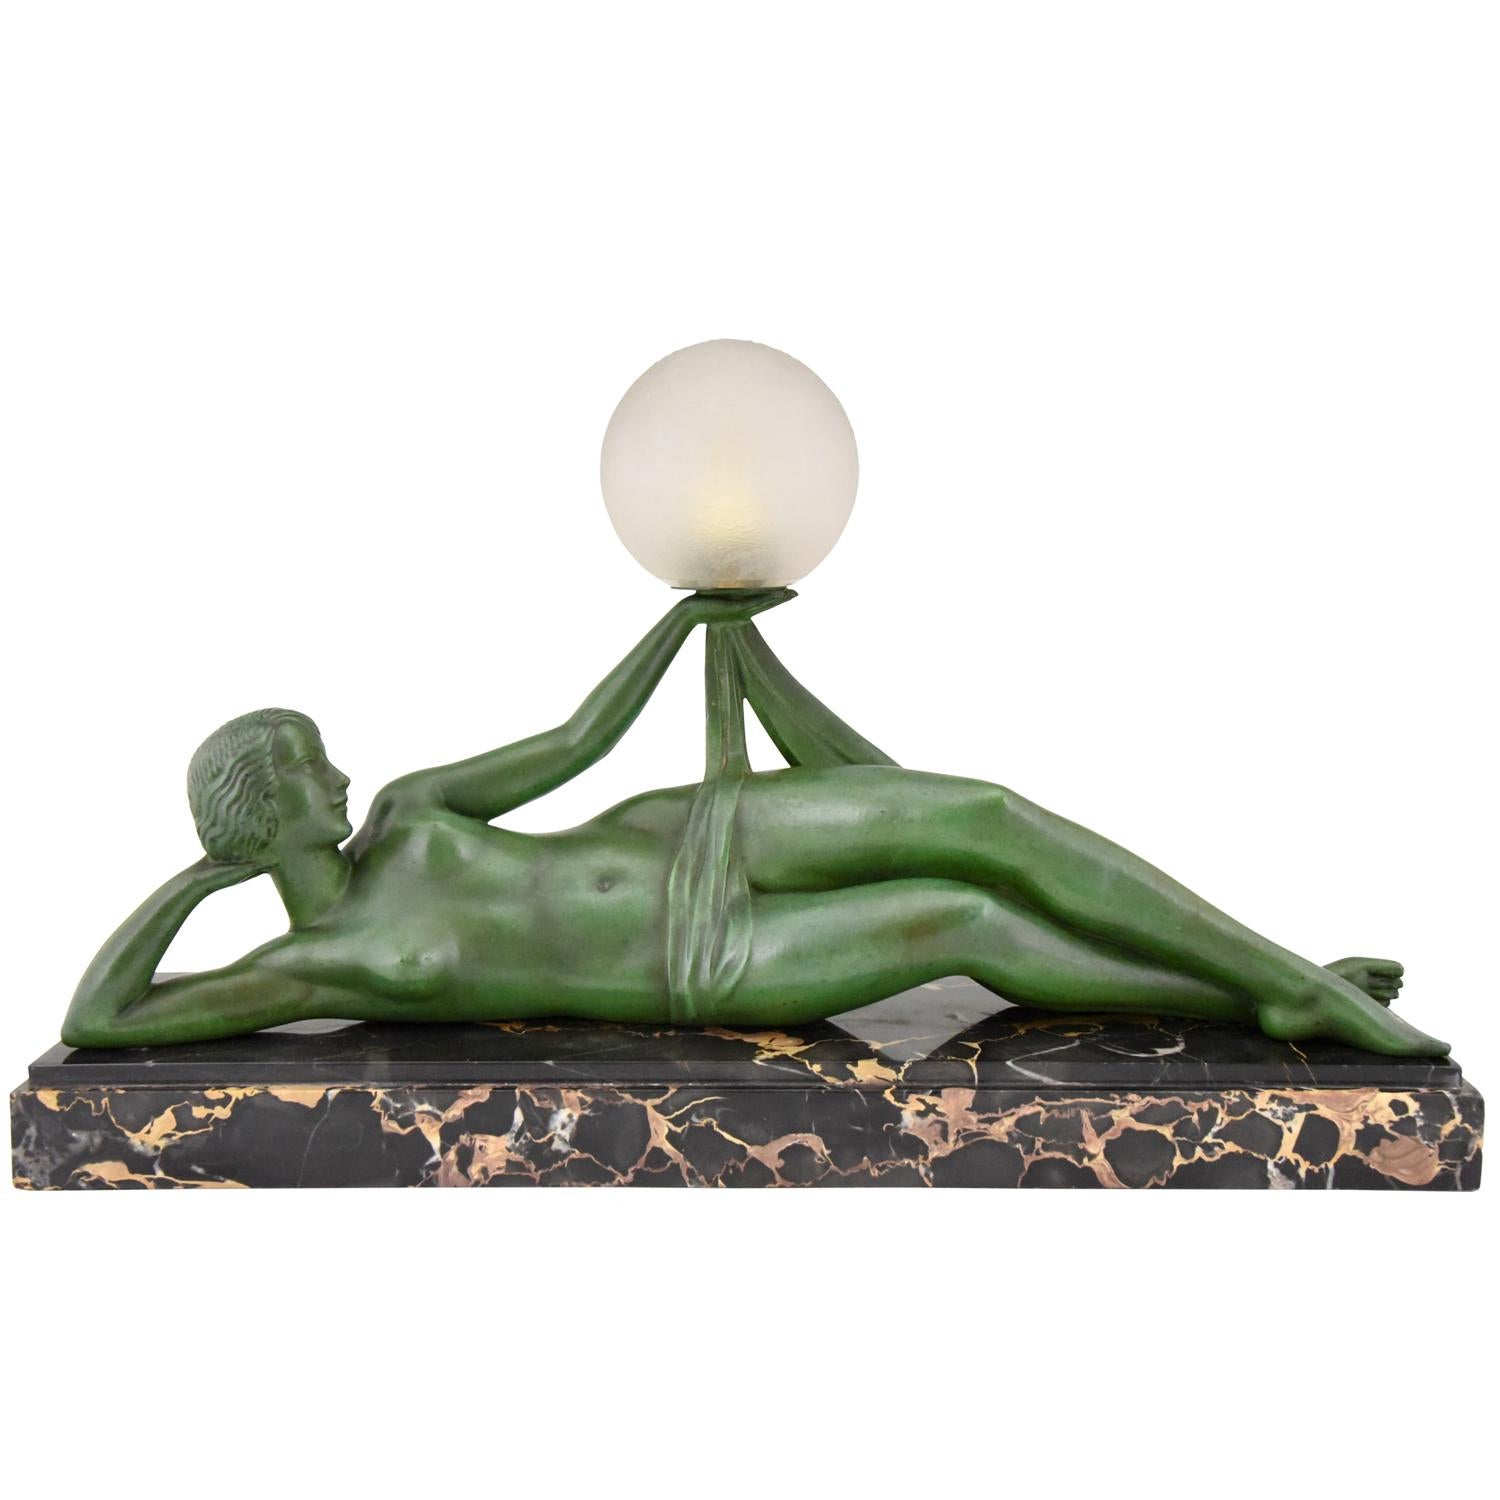 Aube, hard to find Art Deco lamp reclining nude lady with scarf holding a ball signed Fayral, pseudonym of Pierre Le Faguays.
With foundry seal of the Max Le Verrier foundry. Patinated Art Metal figure, on a Portoro marble base with an extra base